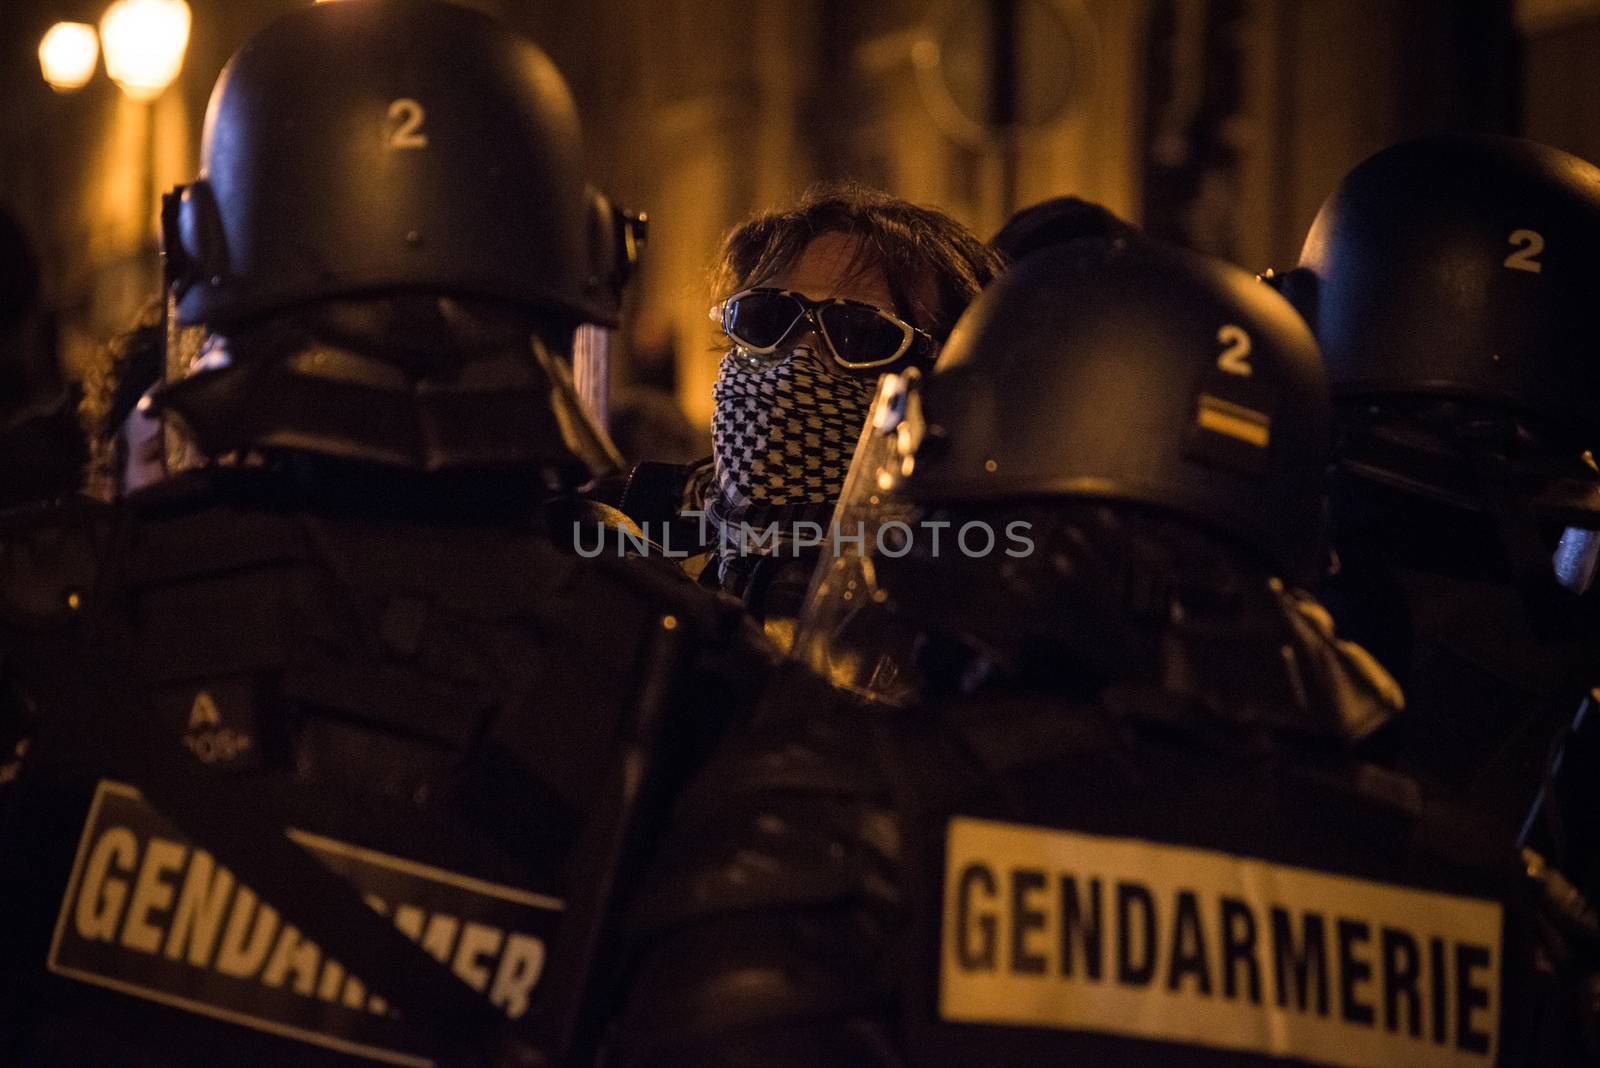 FRANCE - LABOUR - LAW - PROTEST - NIGHT by newzulu